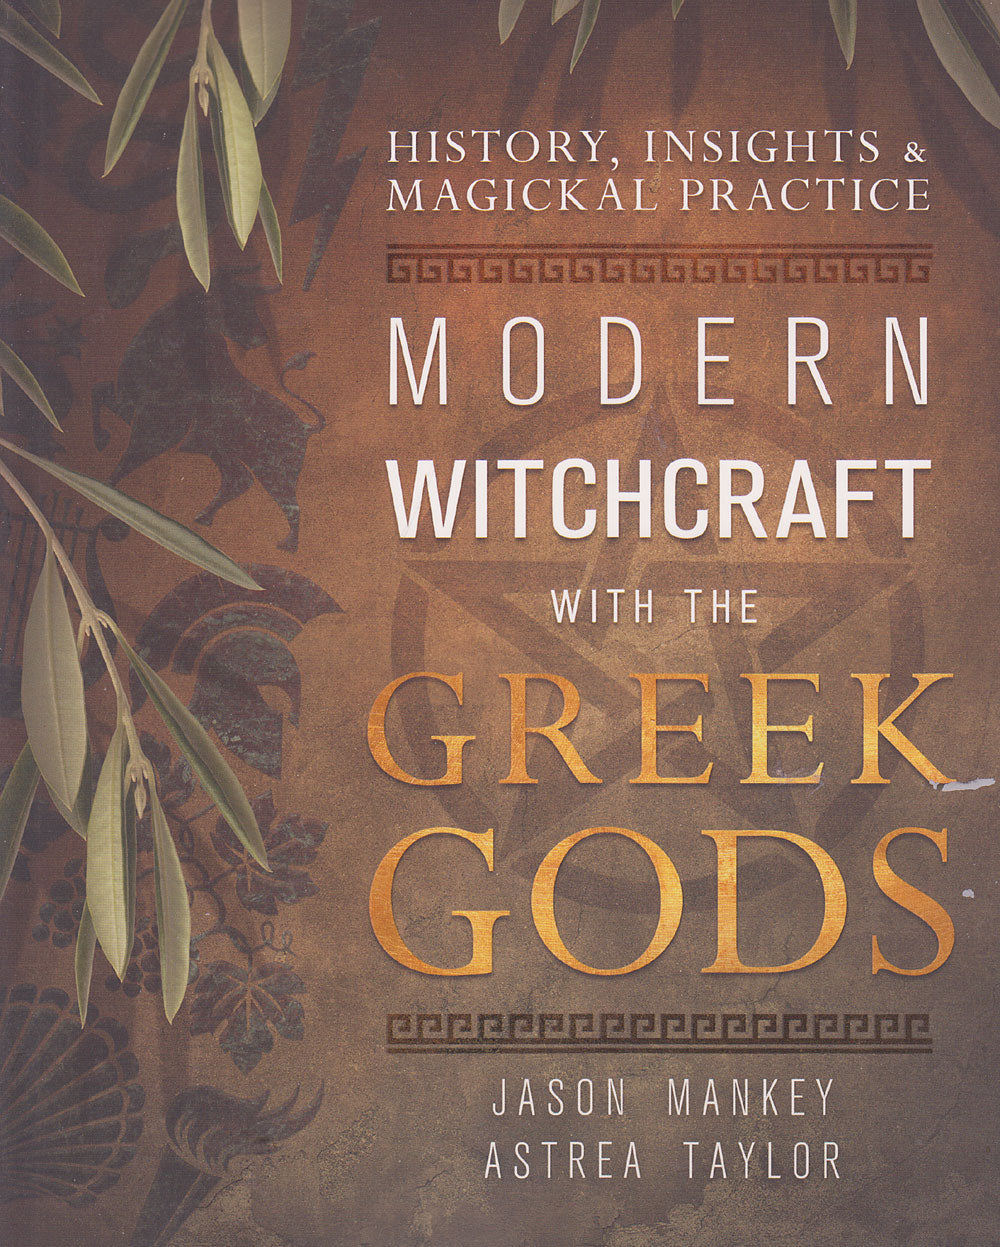 Modern Witchcraft with the Greek Gods